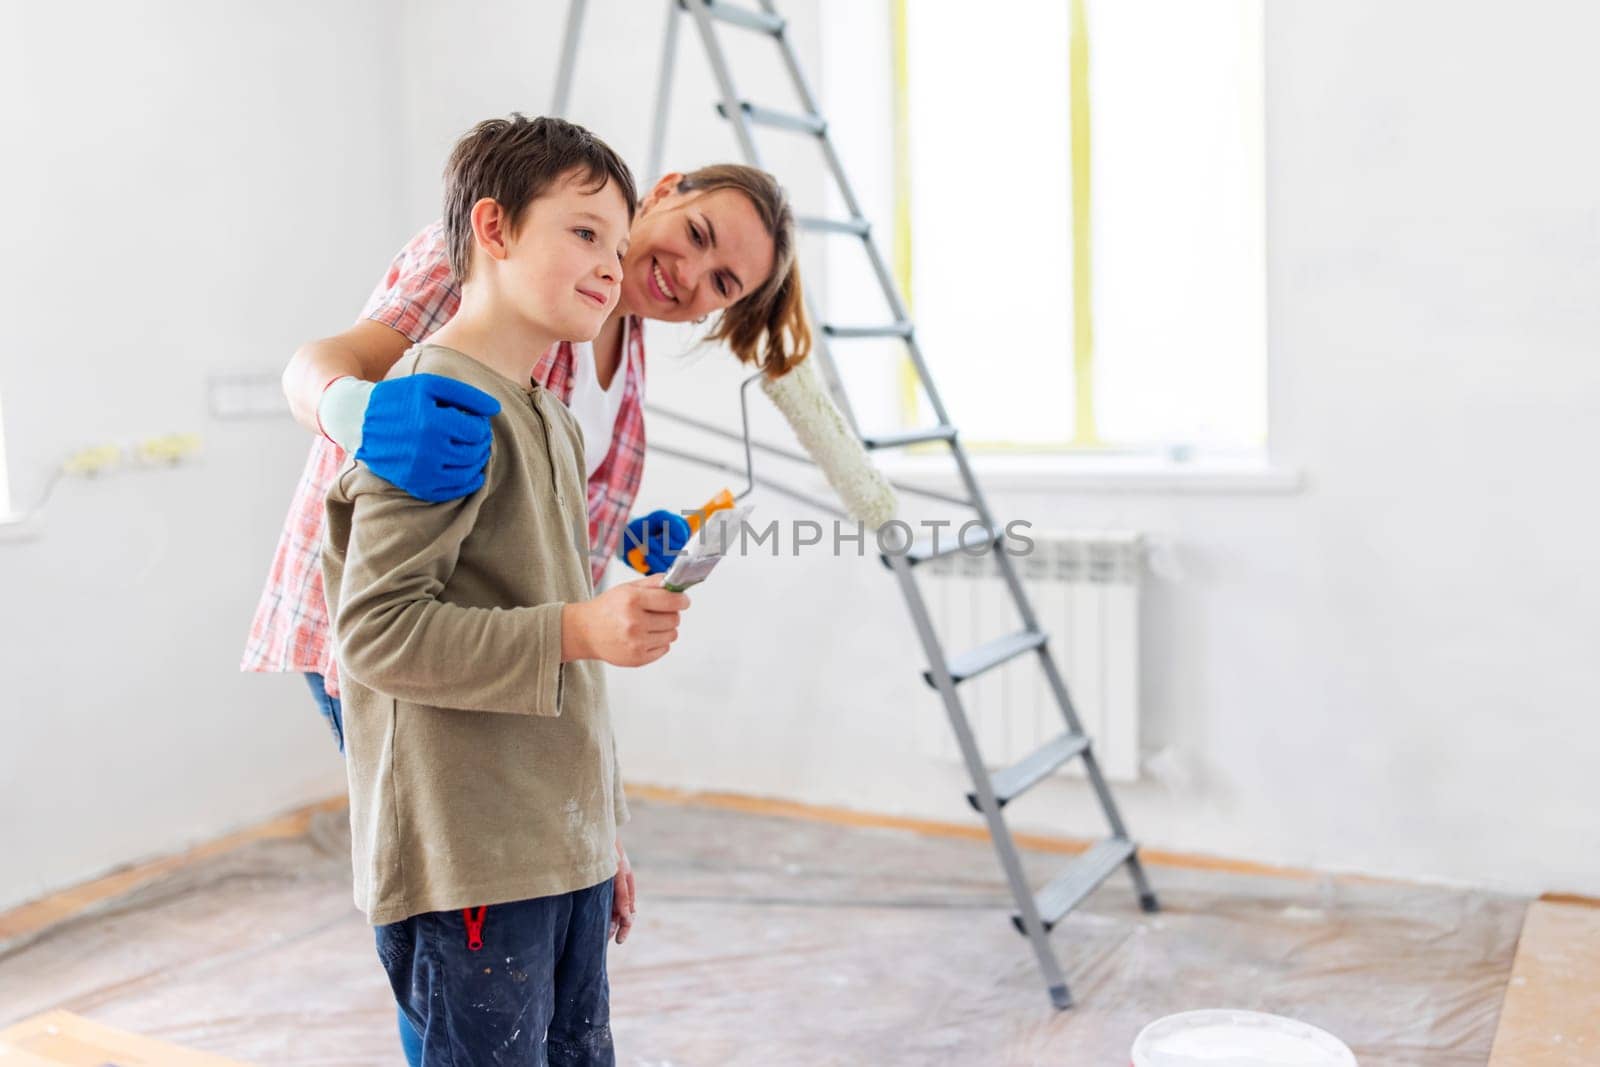 Happy family mother and child son paint the wall with paint using roller and brush. Repair in the apartment